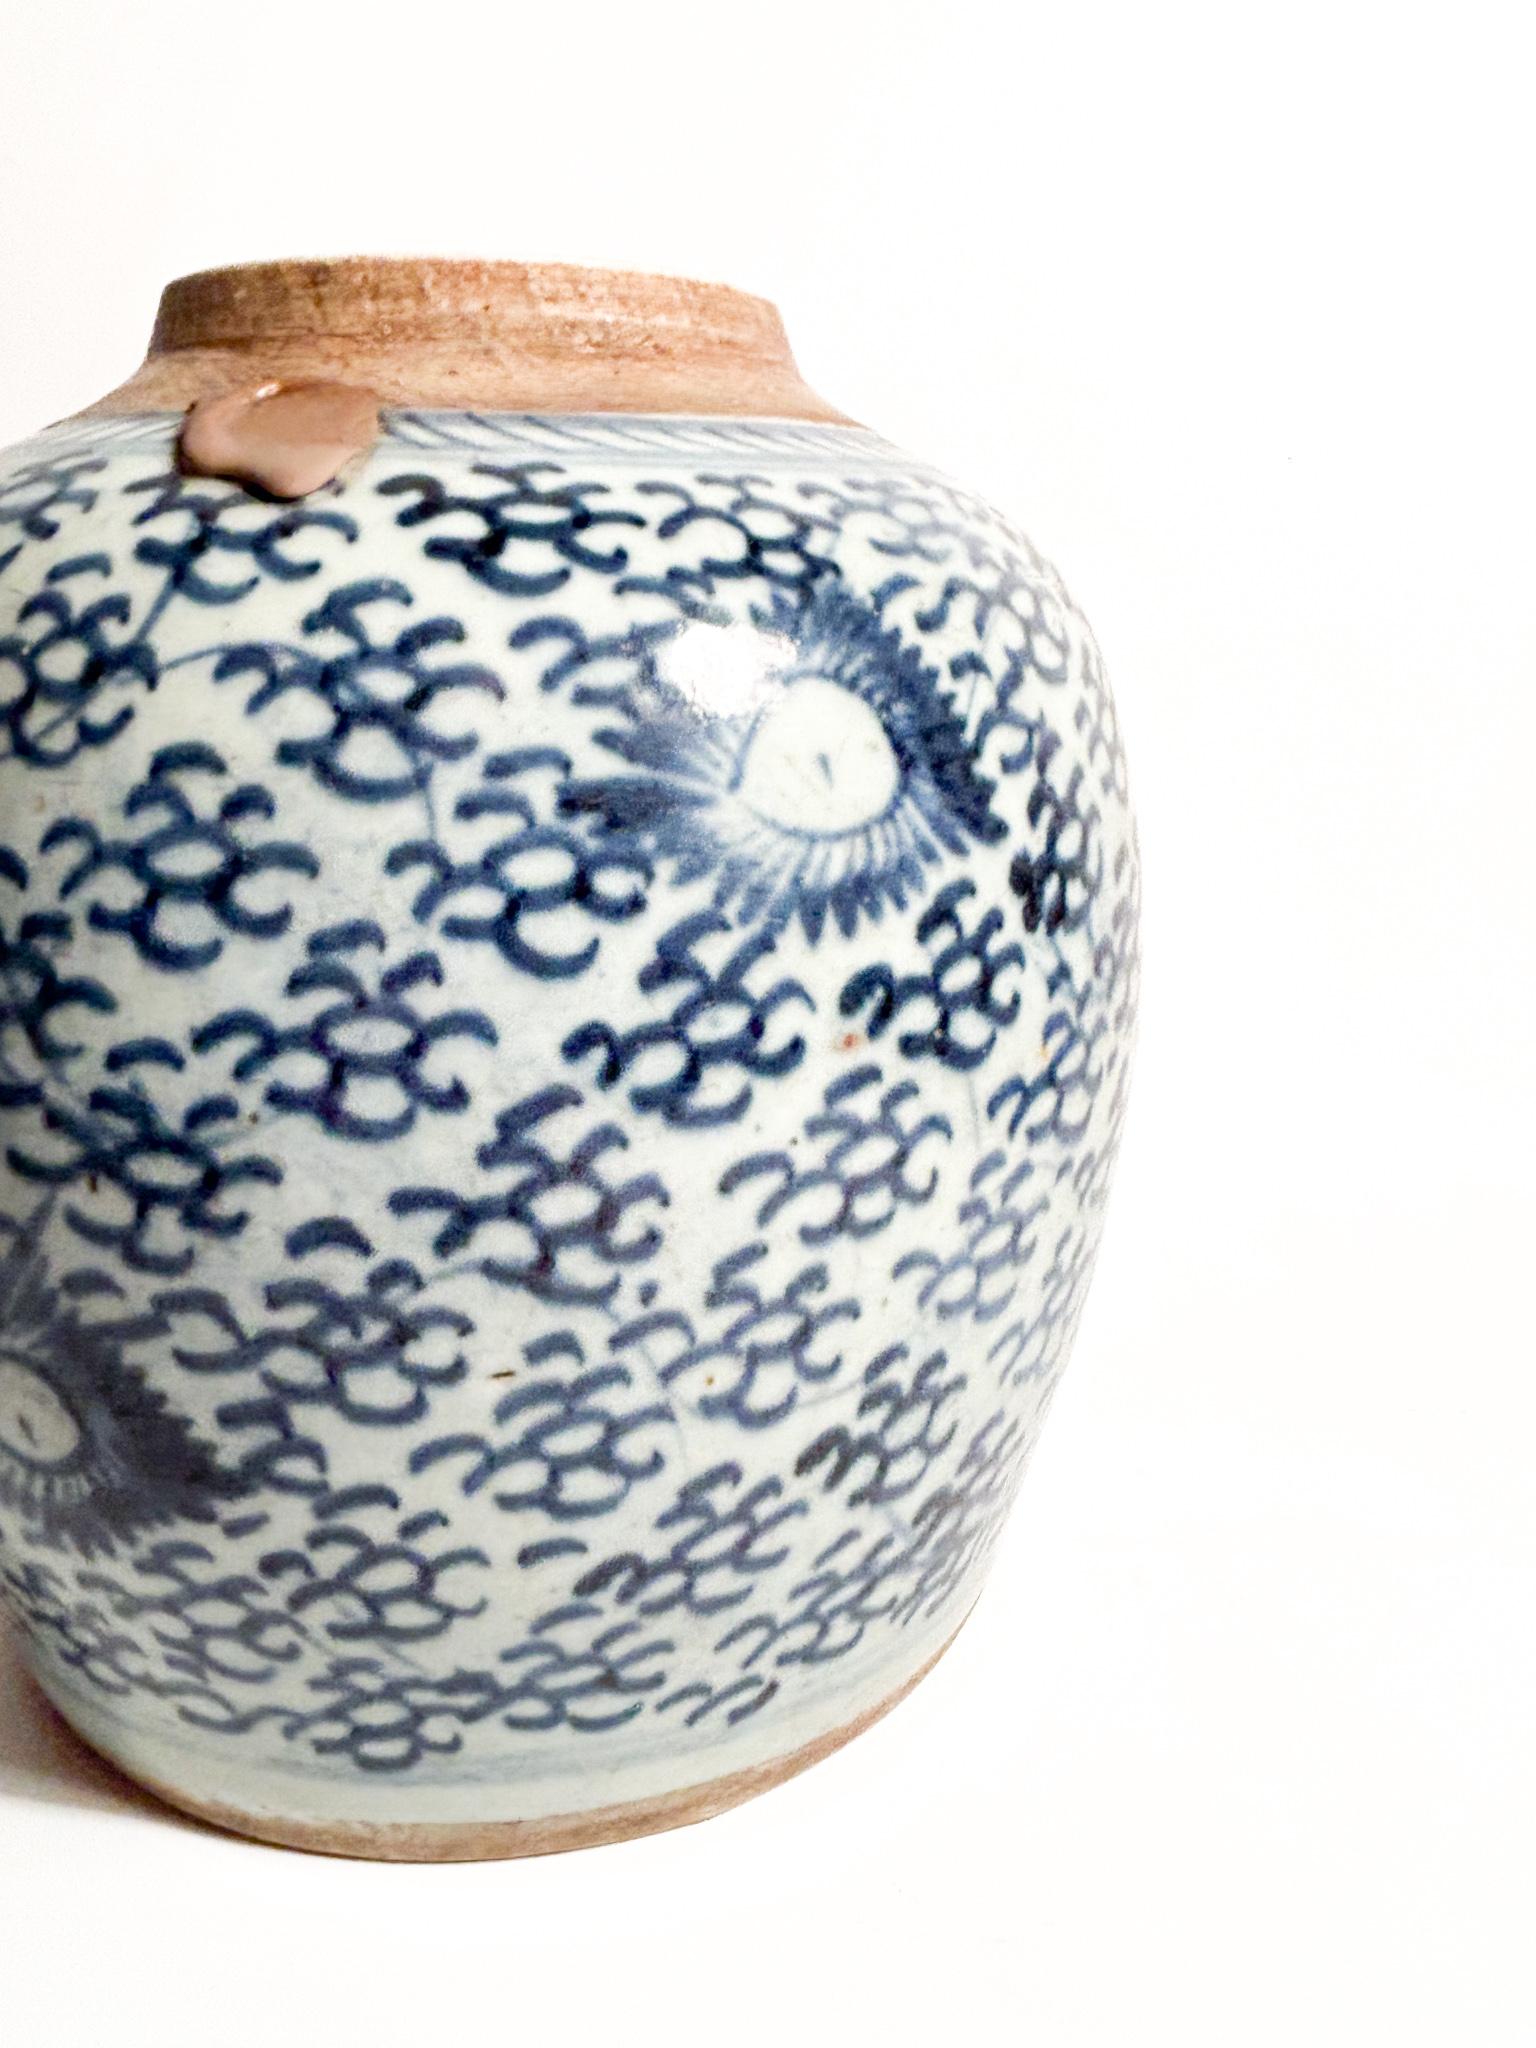 Chinese Ceramic Vase with Blue China Decorations from the 1950s For Sale 1